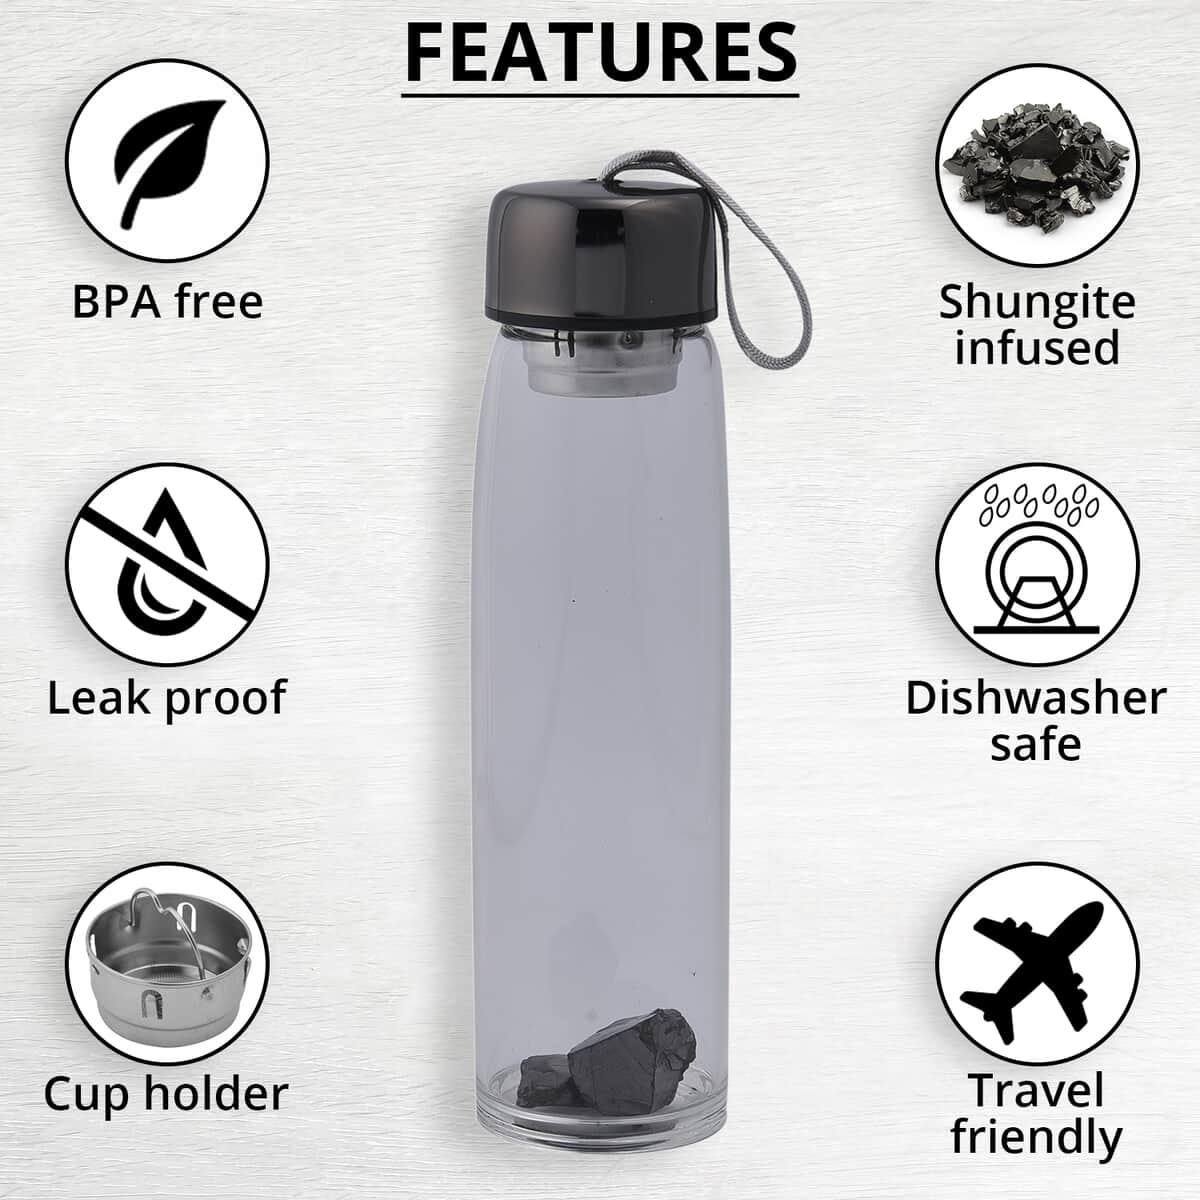 Gunmetal Color Stainless Steel and Glass Elite Shungite Filter Infuser Water Bottle 16.9oz image number 2